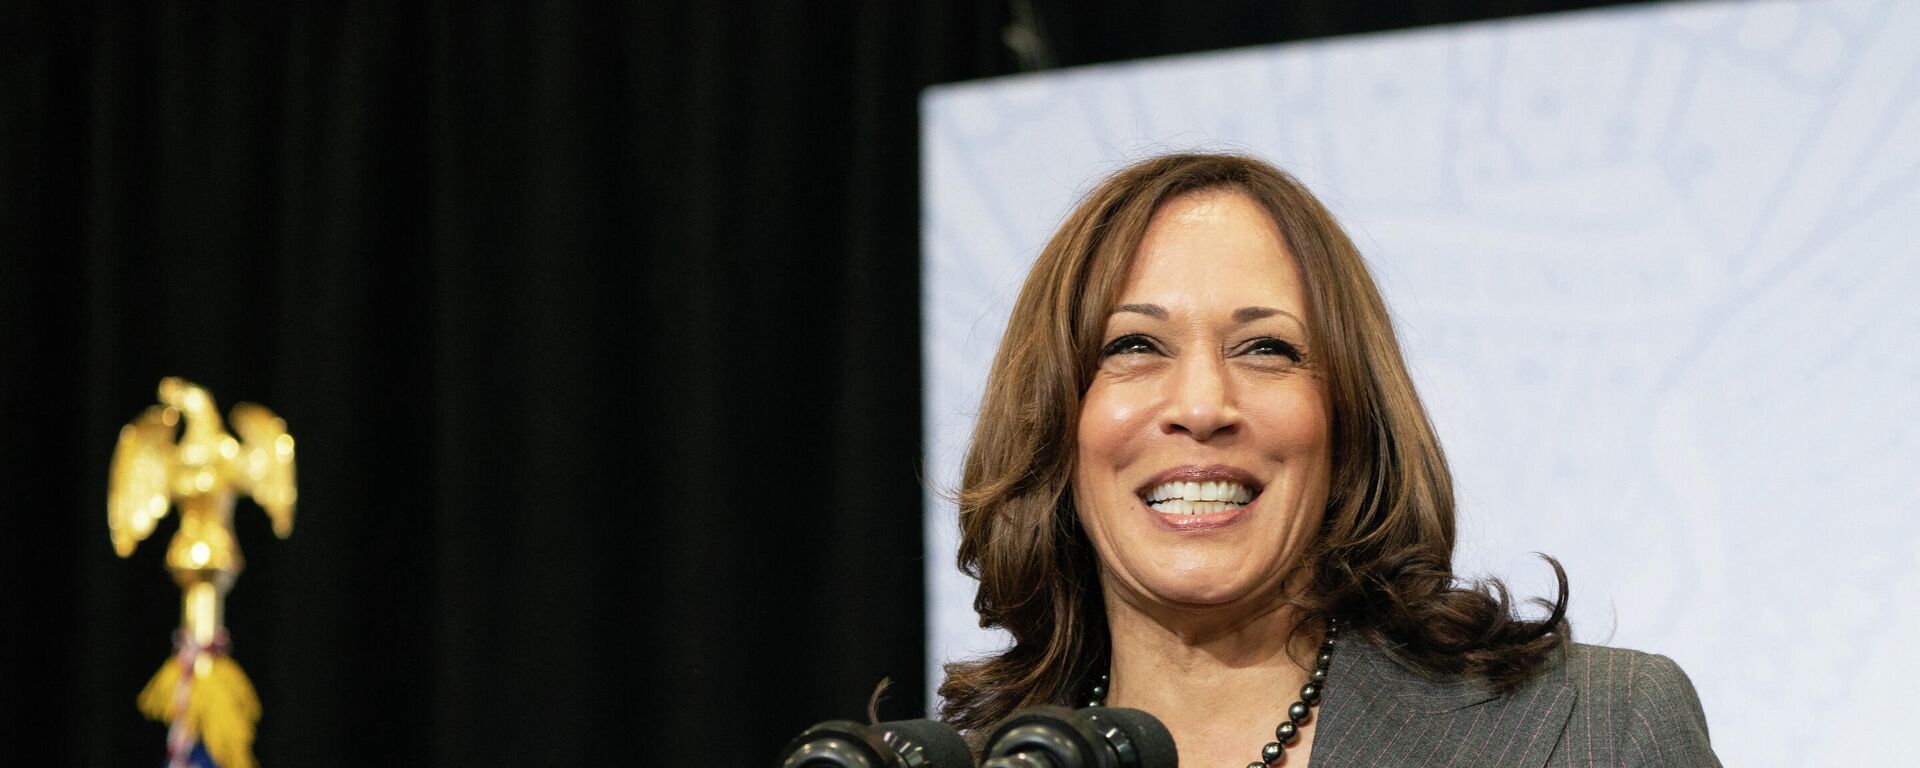 US Vice President Kamala Harris speaks about the Bipartisan Infrastructure Deal and the Build Back Better Agenda at the Edenwald YMCA on October 22, 2021 in the Bronx Borough of New York.  - Sputnik International, 1920, 03.11.2021